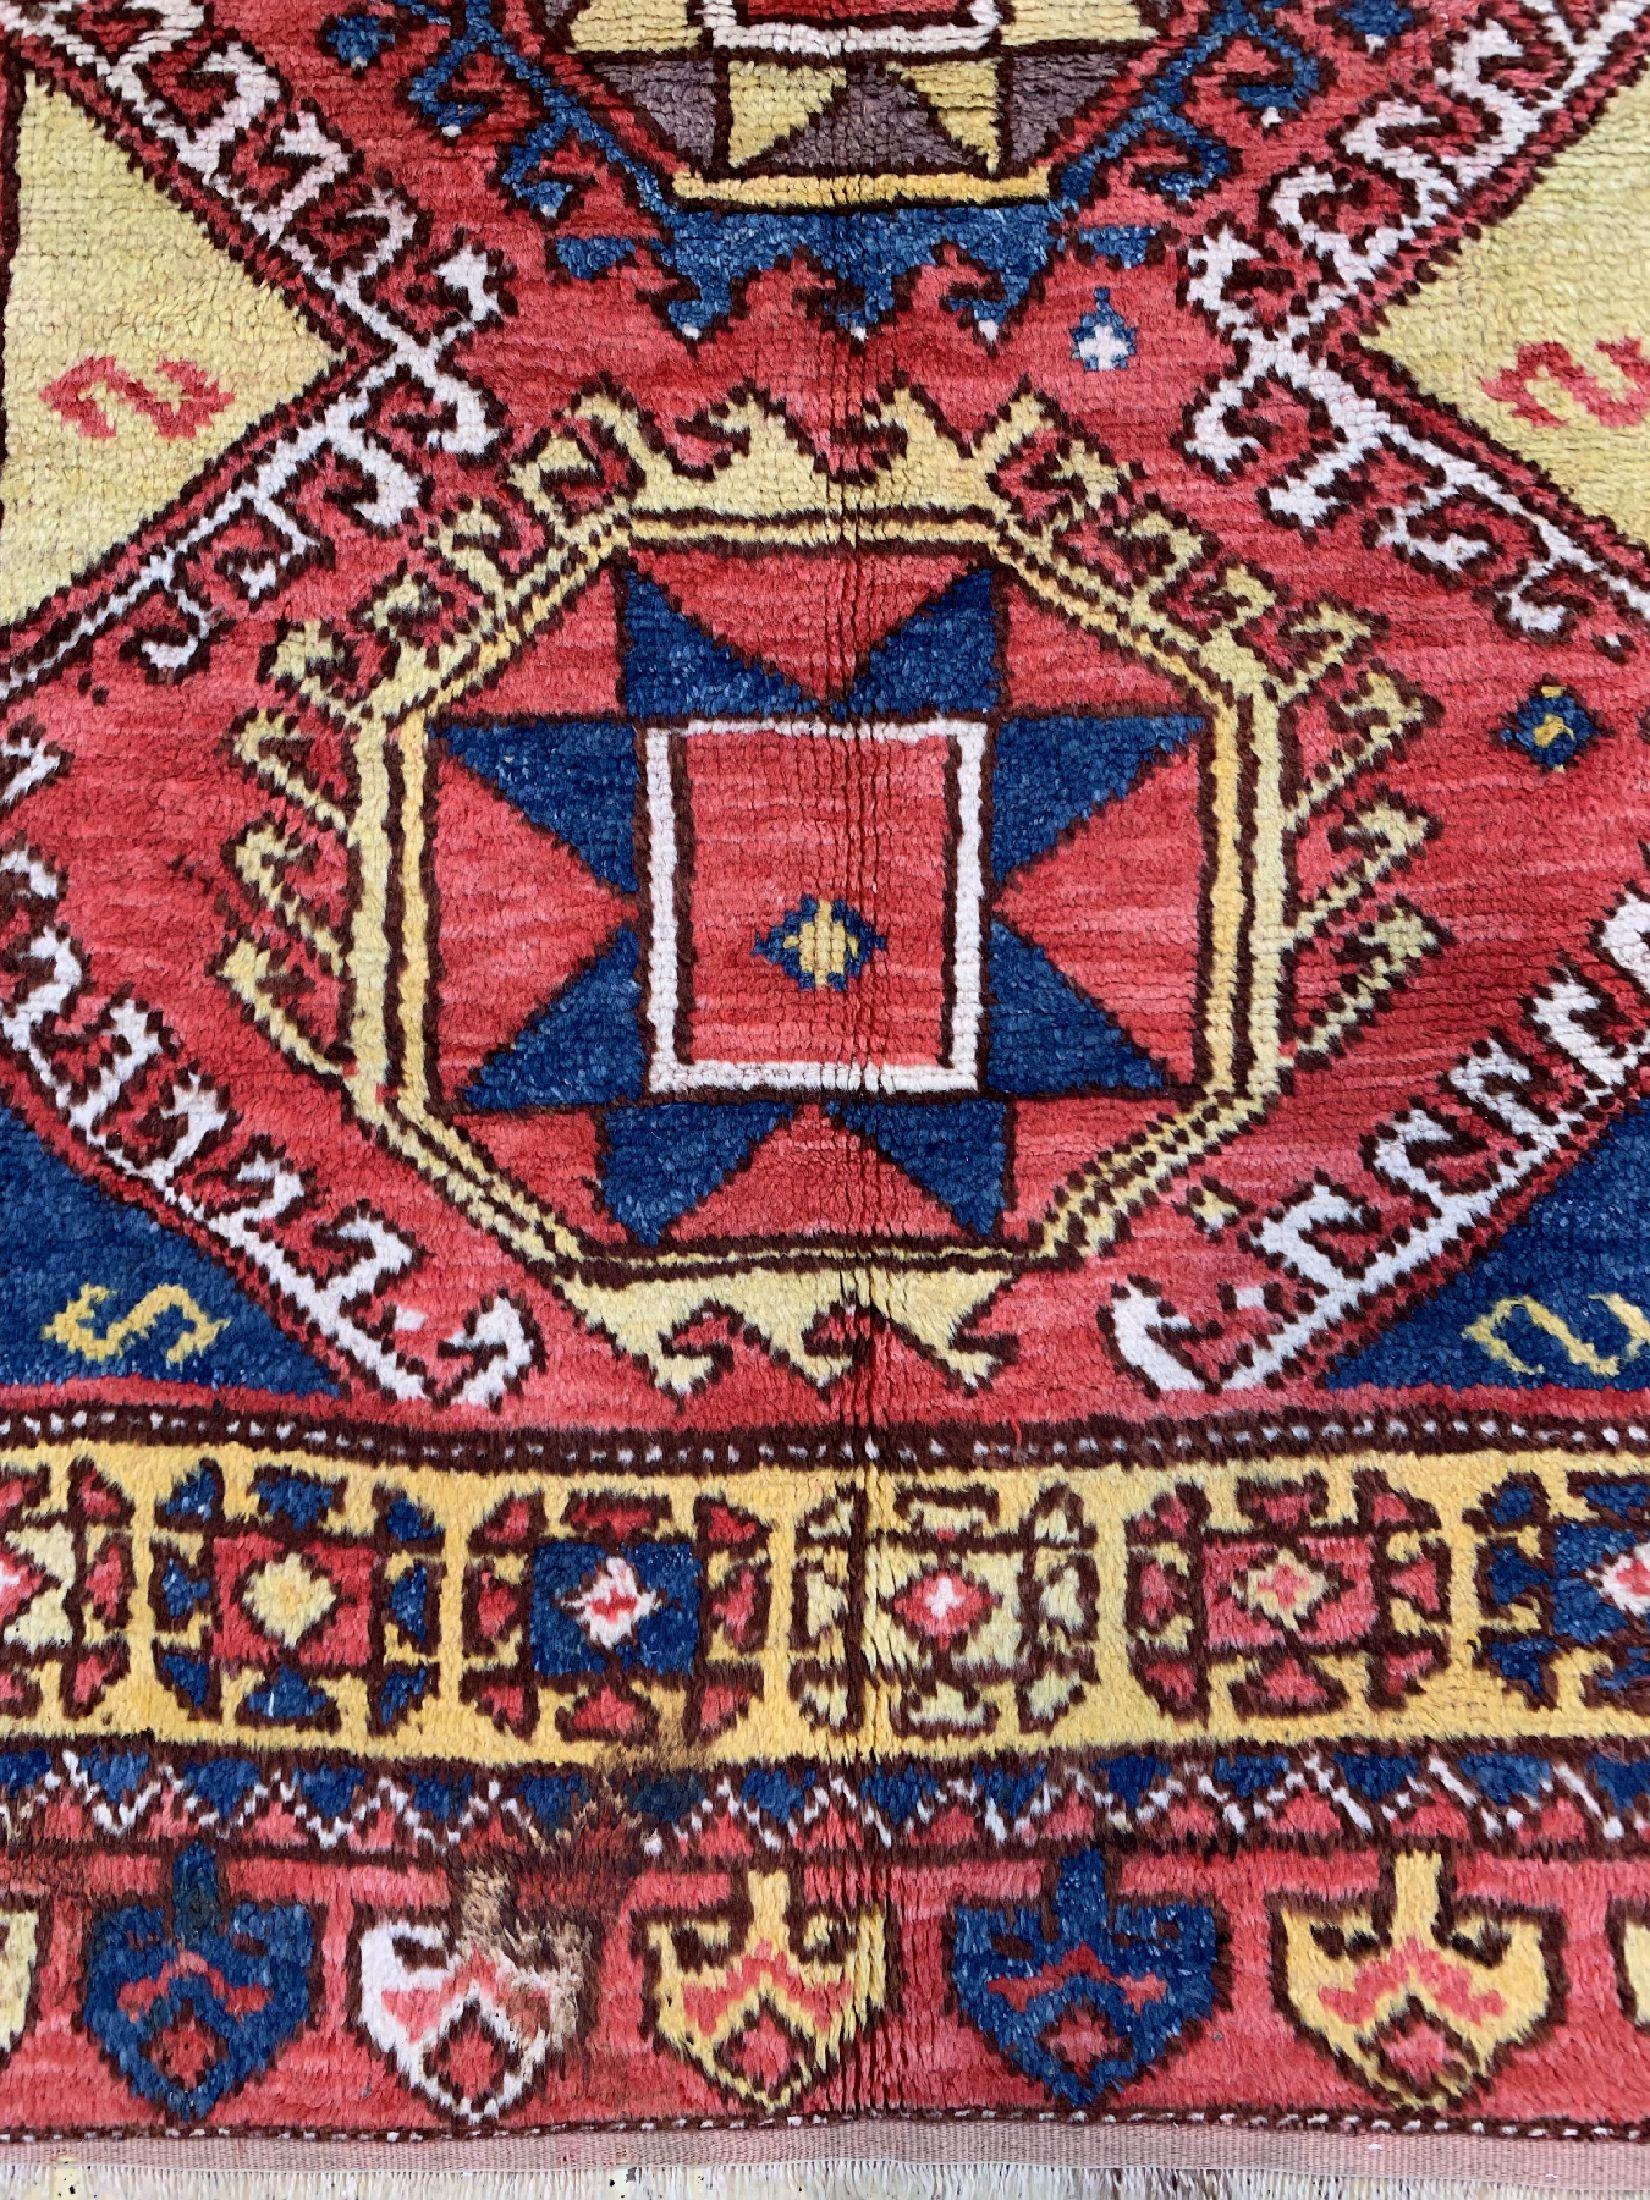 This is a magnificent carpet from Konya, Central Anatolia. It has all the characteristics of this carpet region from which the most beautiful and best pieces in Anatolia come. Konya was for a long time the center of Anatolian weaving art and